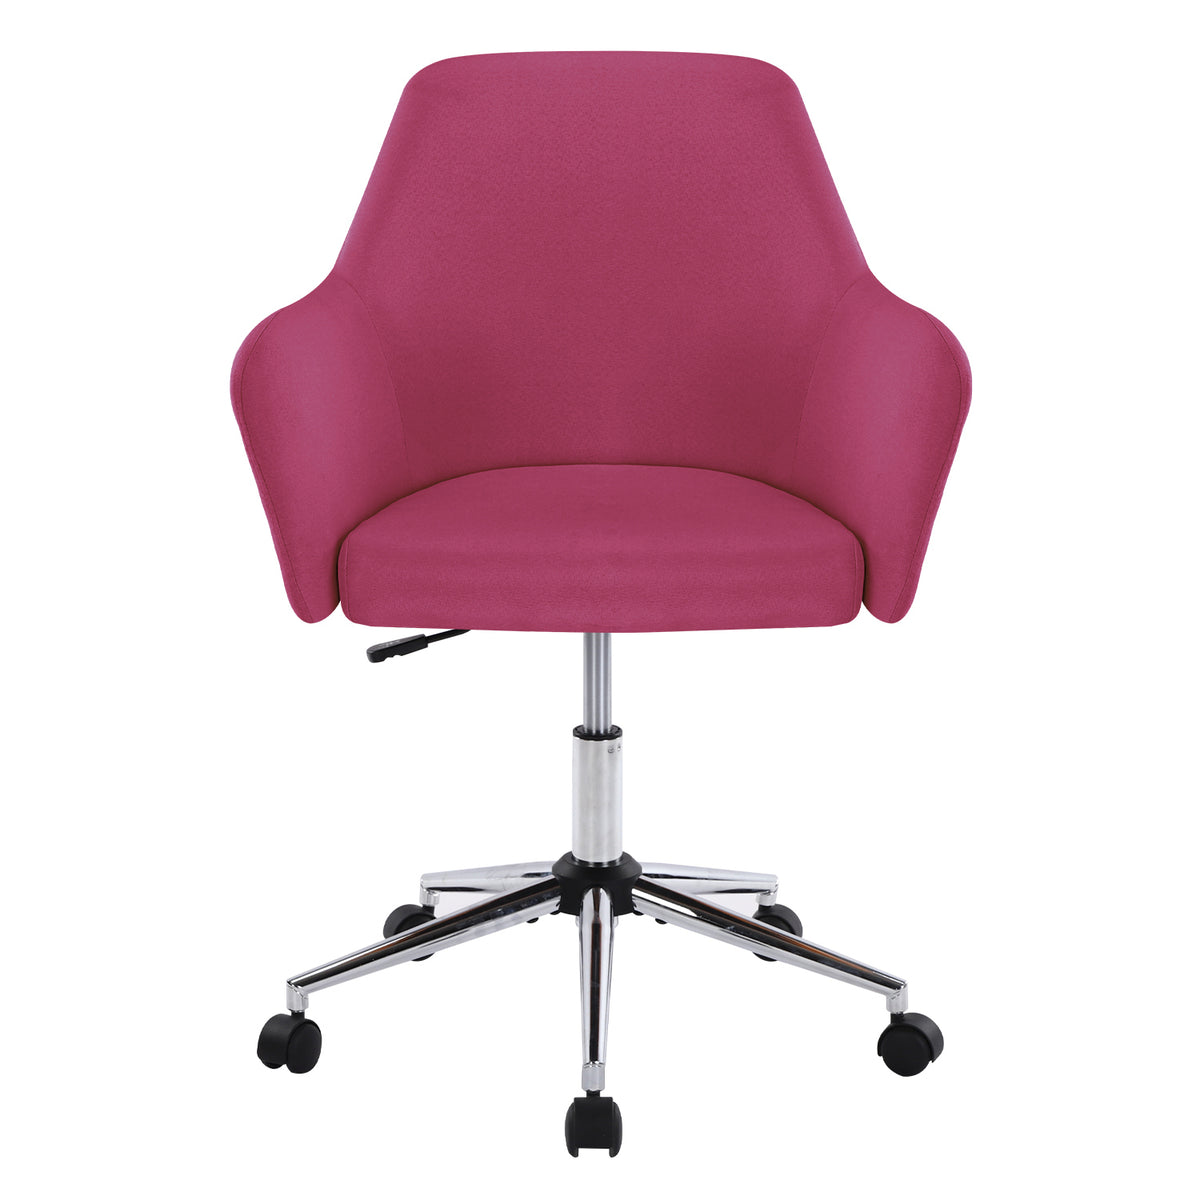 Swivel Adjustable Task Chair Executive Accent Chair with Soft Seat - Rose Red